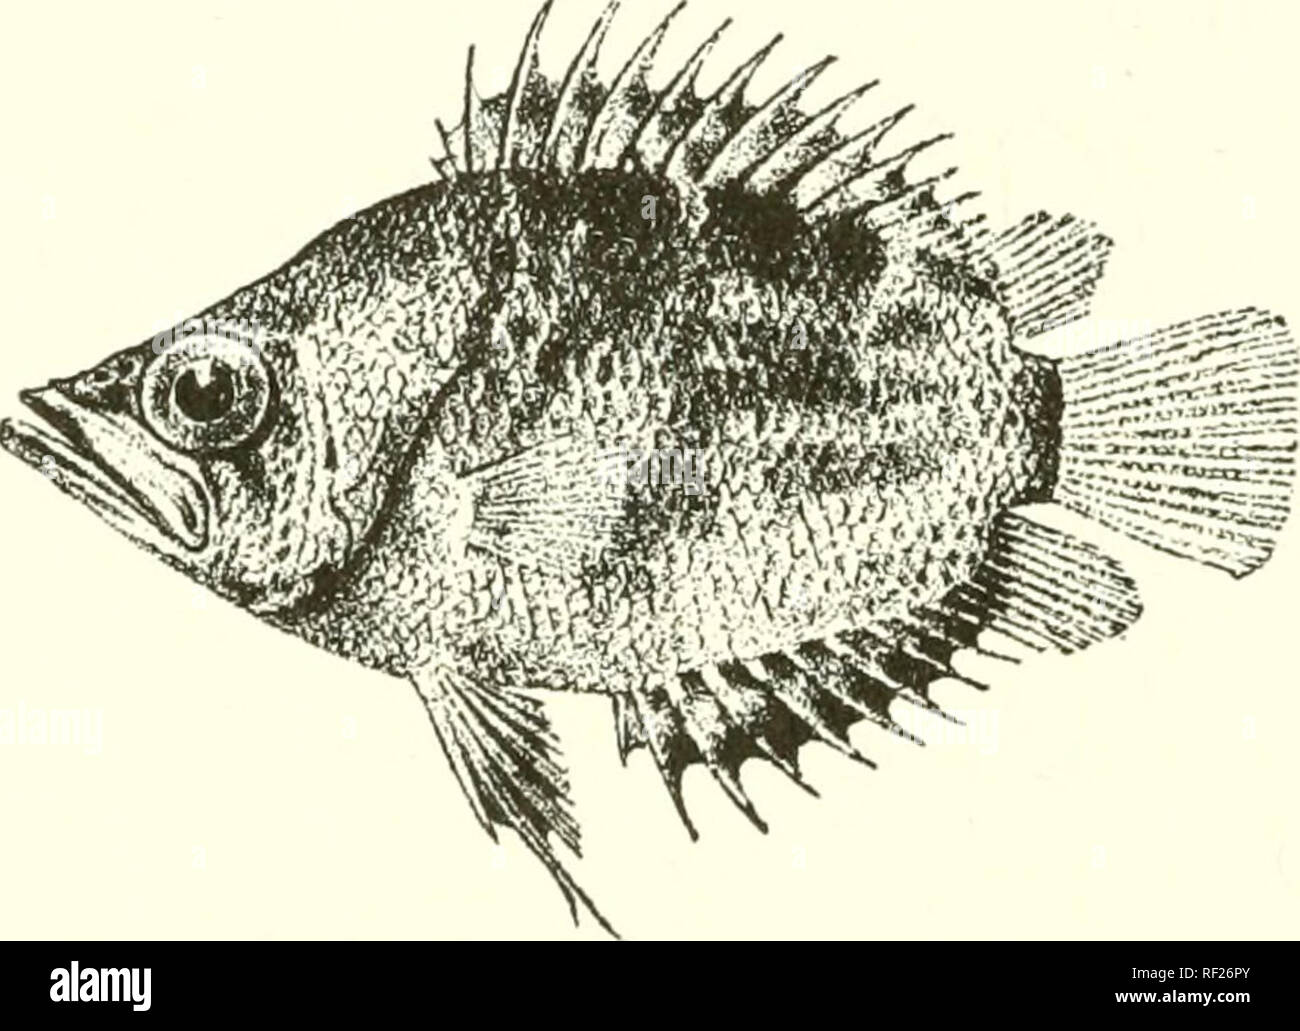 . Catalogue of the fresh-water fishes of Africa in the British Museum (Natural History). Fishes; Freshwater animals. 100 NANDID^. 1. POLYCENTROPSIS ABBREVIATA. Bouleng. 1. c. pi. iii. fig. 2 ; Pellegr. Bull. Soc. Philom. (9) ix. 1907, p. 34. Depth of body twice in total length, length of head 2J to 2J times. vSnout acutely pointed, chin projecting ; eye as long as or a little longer than snout or iriterorbital width, nearly 3 to o^^ times in length of head; maxillary extending to below centre or posterior third of eye ; 6 to 9 series of scales on the cheek. 9 to 11 gill-rakers on lower part of Stock Photo